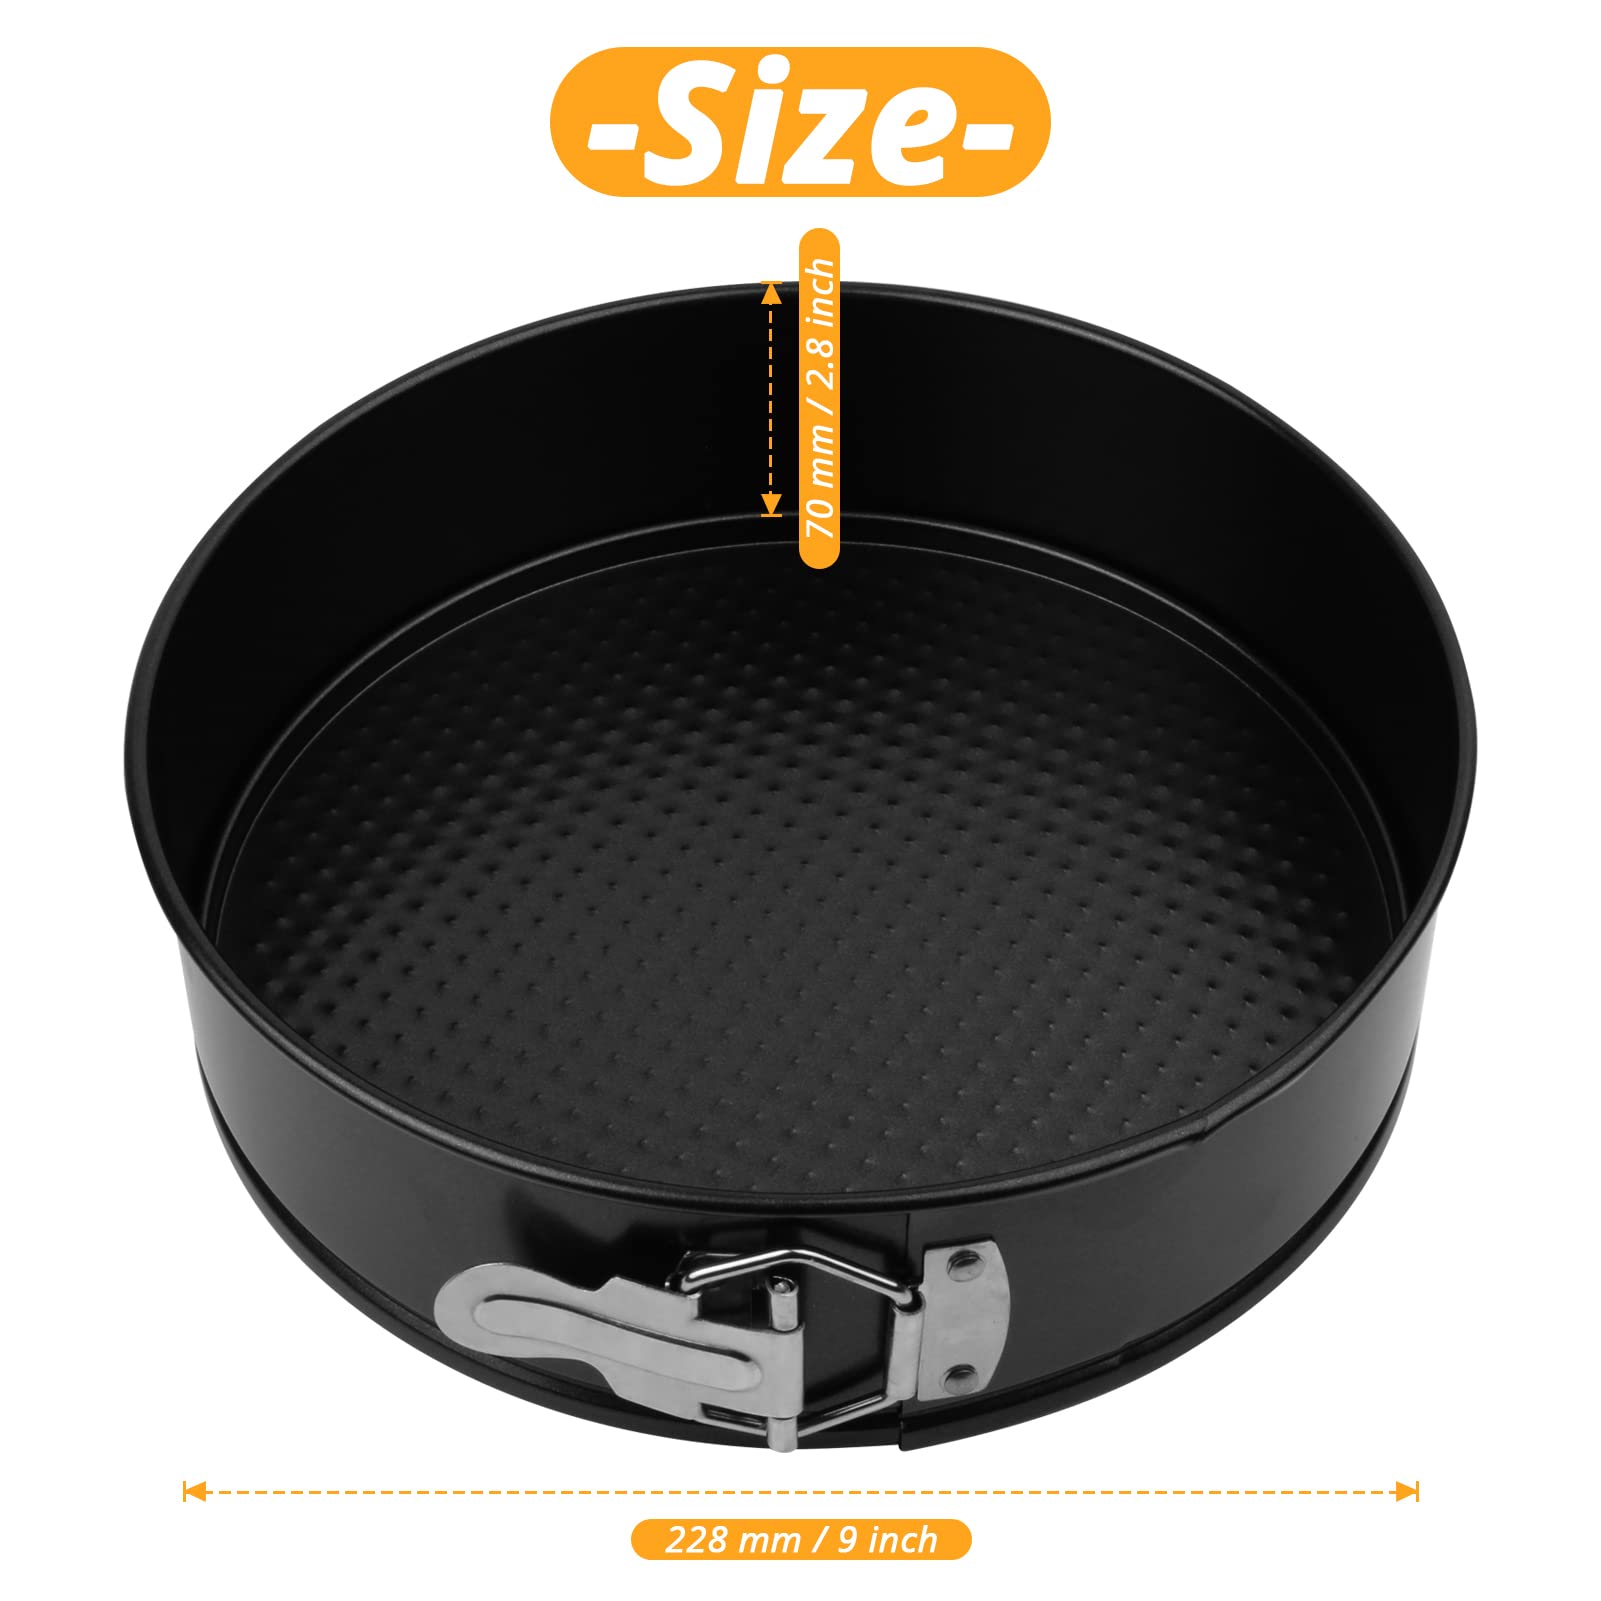 Sihuuu 9 Inch Cheesecake Pan, Springform Pan Set, Nonstick Leakproof Springform Pan for Mini Cheesecakes, Pizzas, Quiches